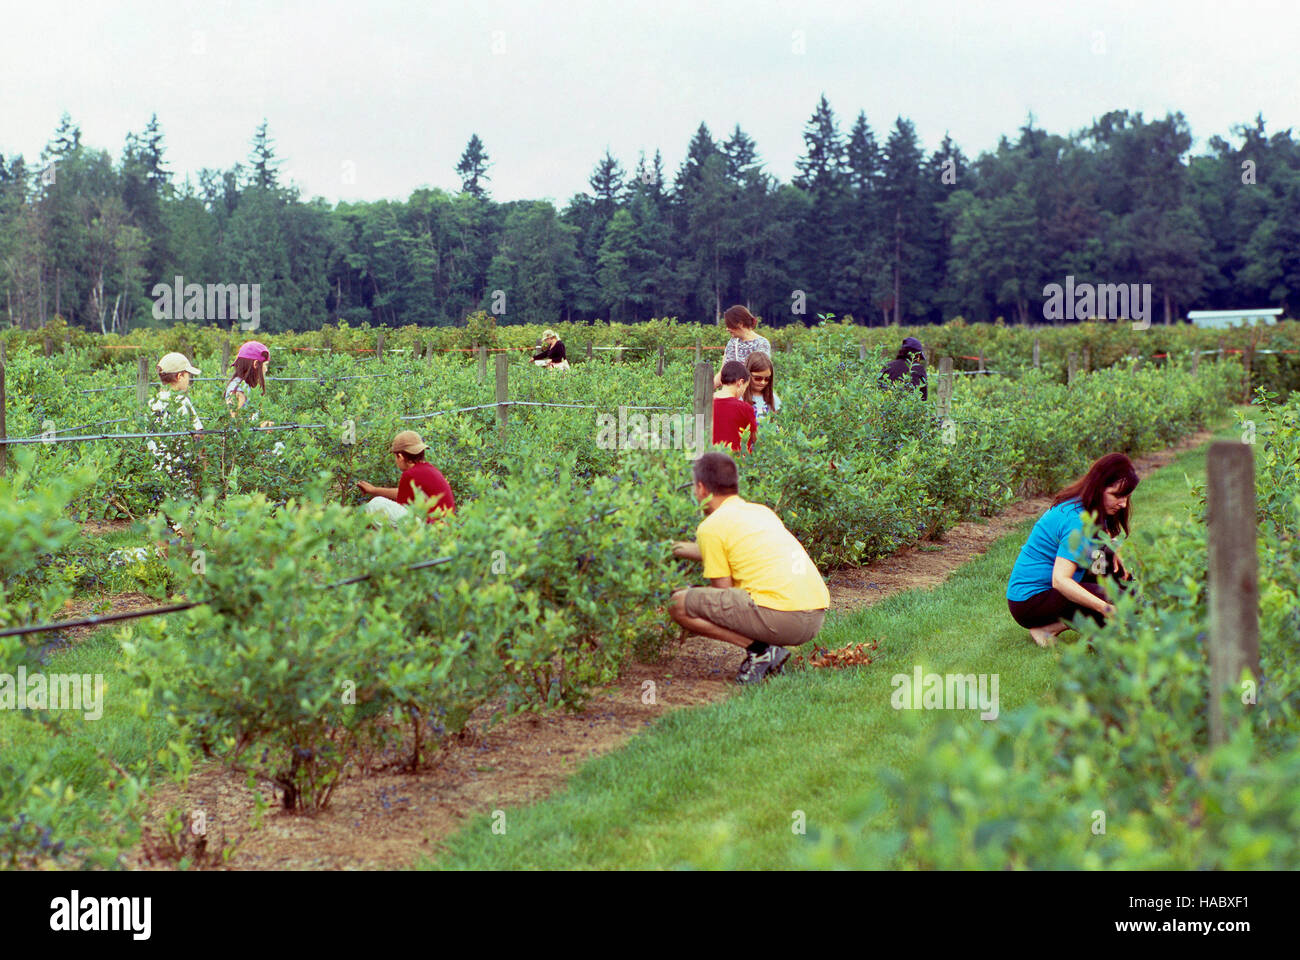 People picking Blueberries at a U-Pick Blueberry Farm, Fraser Valley, BC, British Columbia, Canada Stock Photo